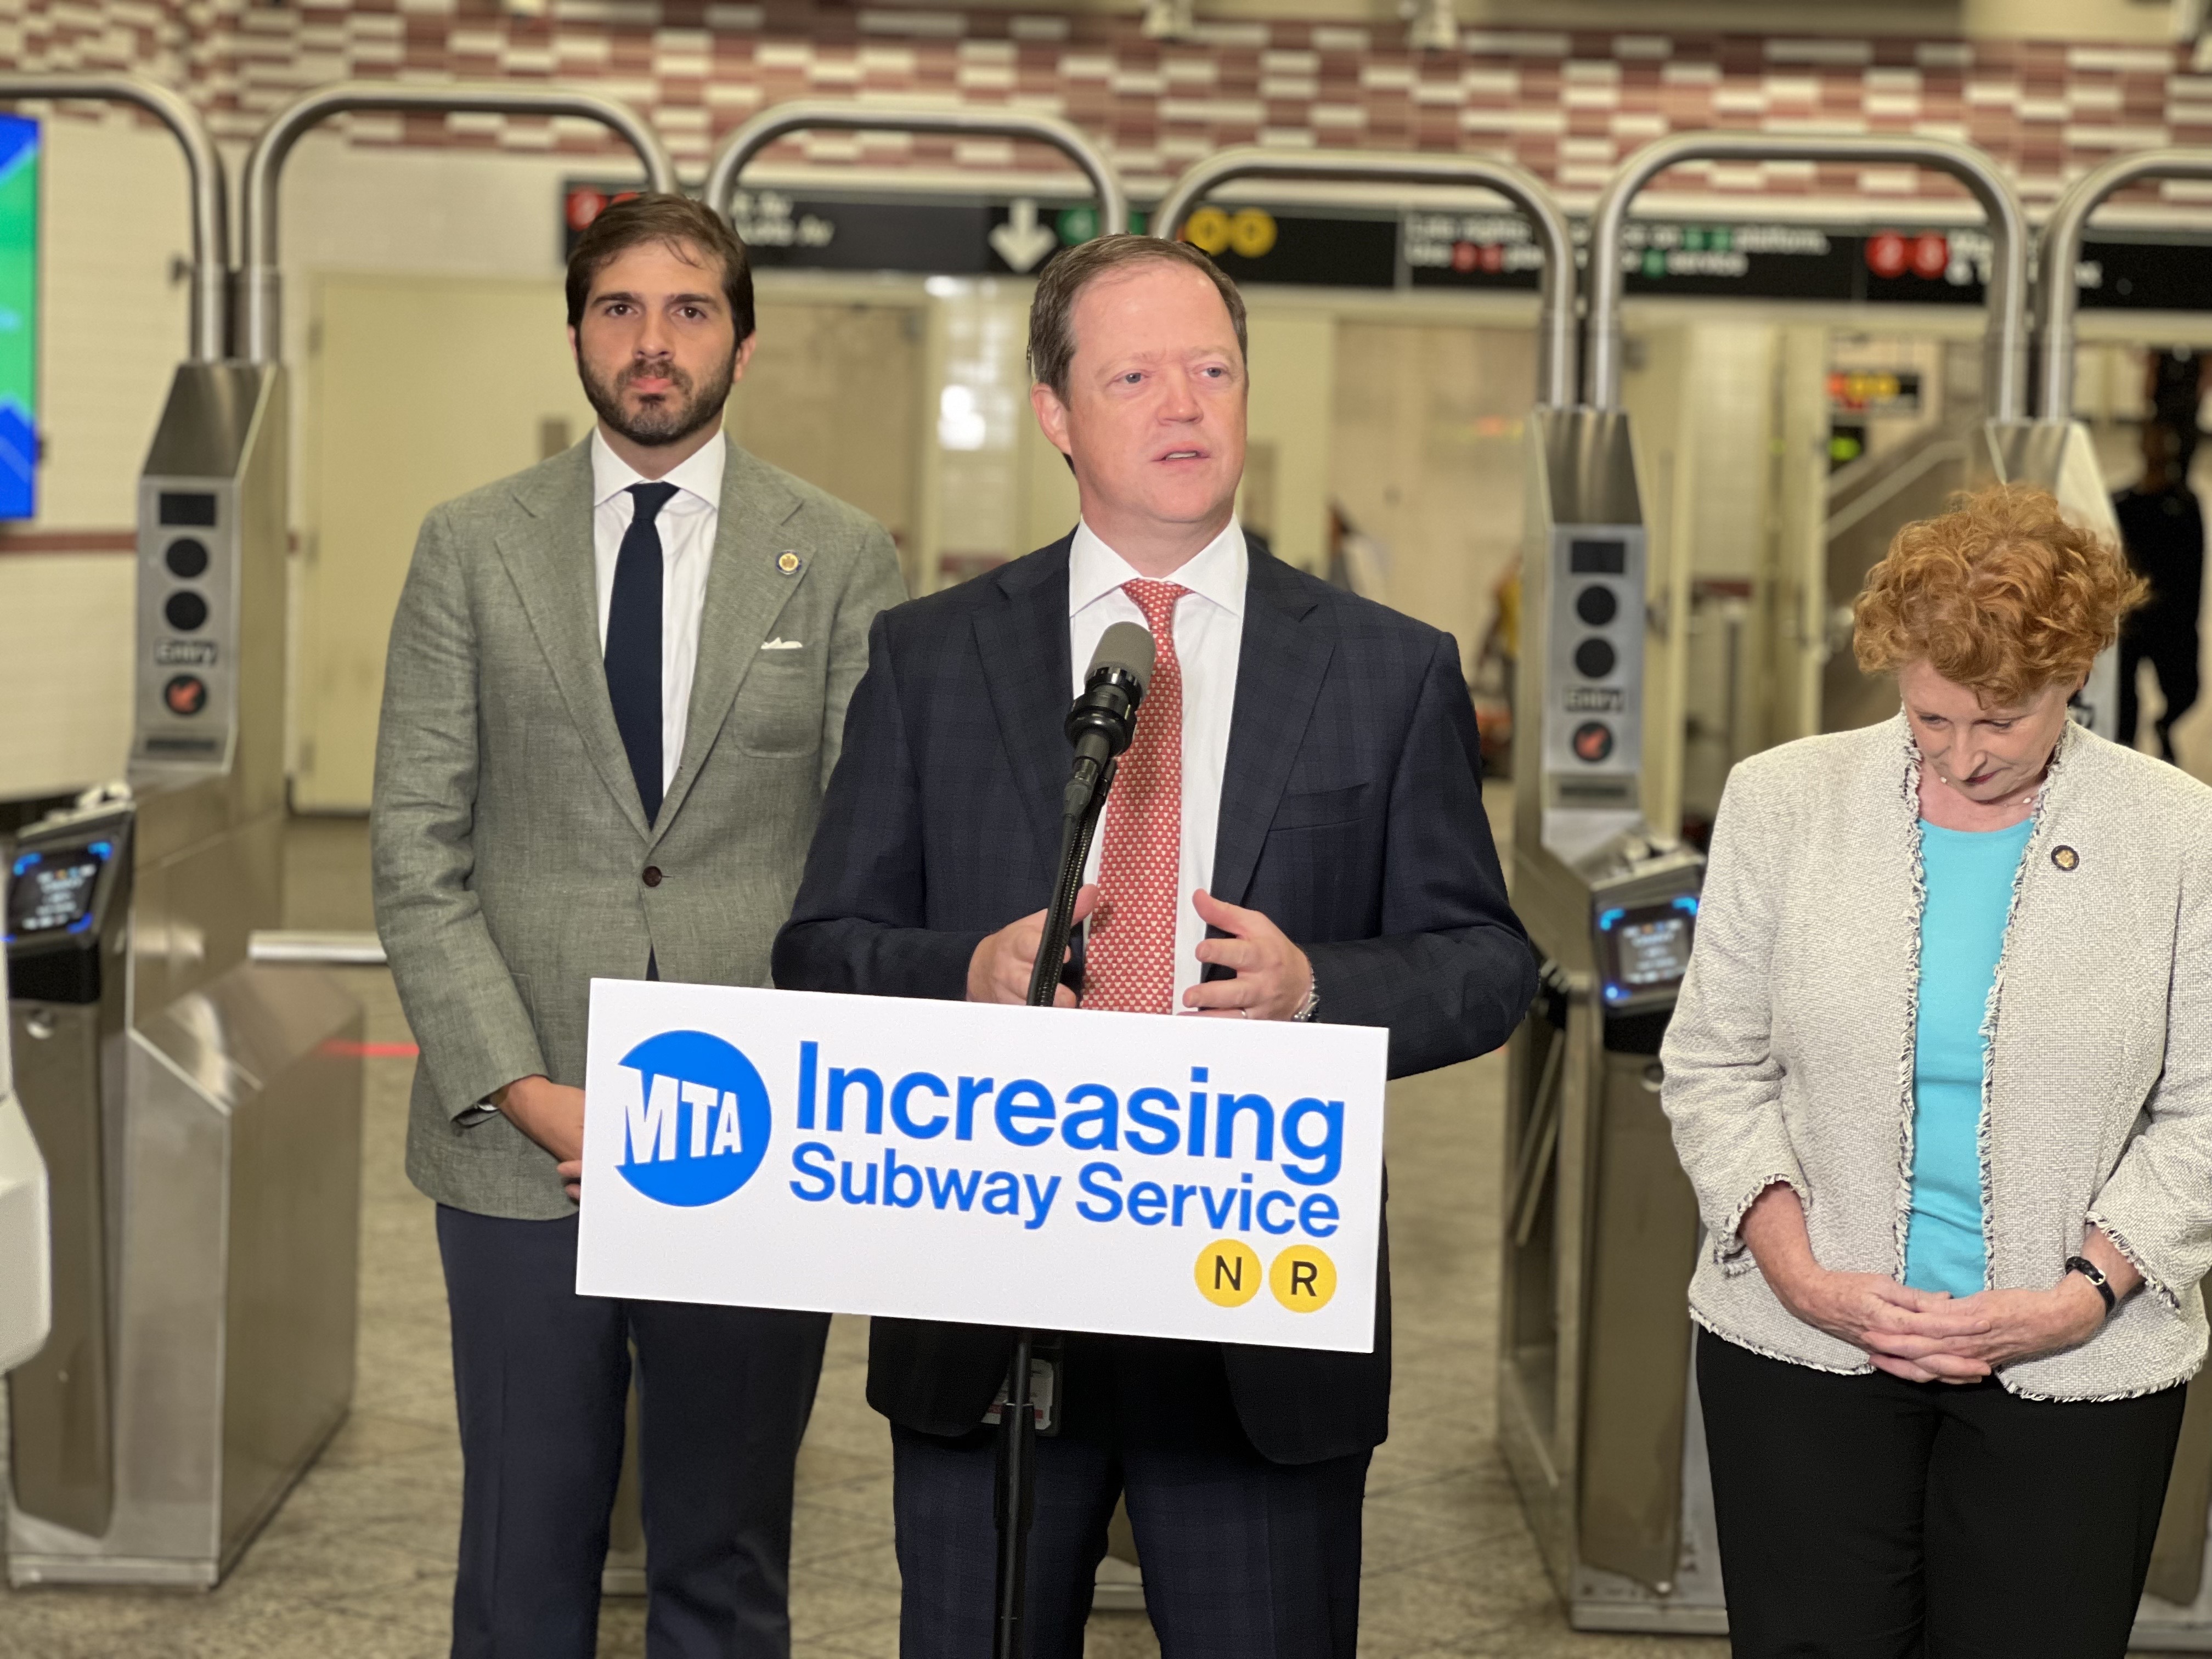 MTA Announces Service Increases on N and R Lines